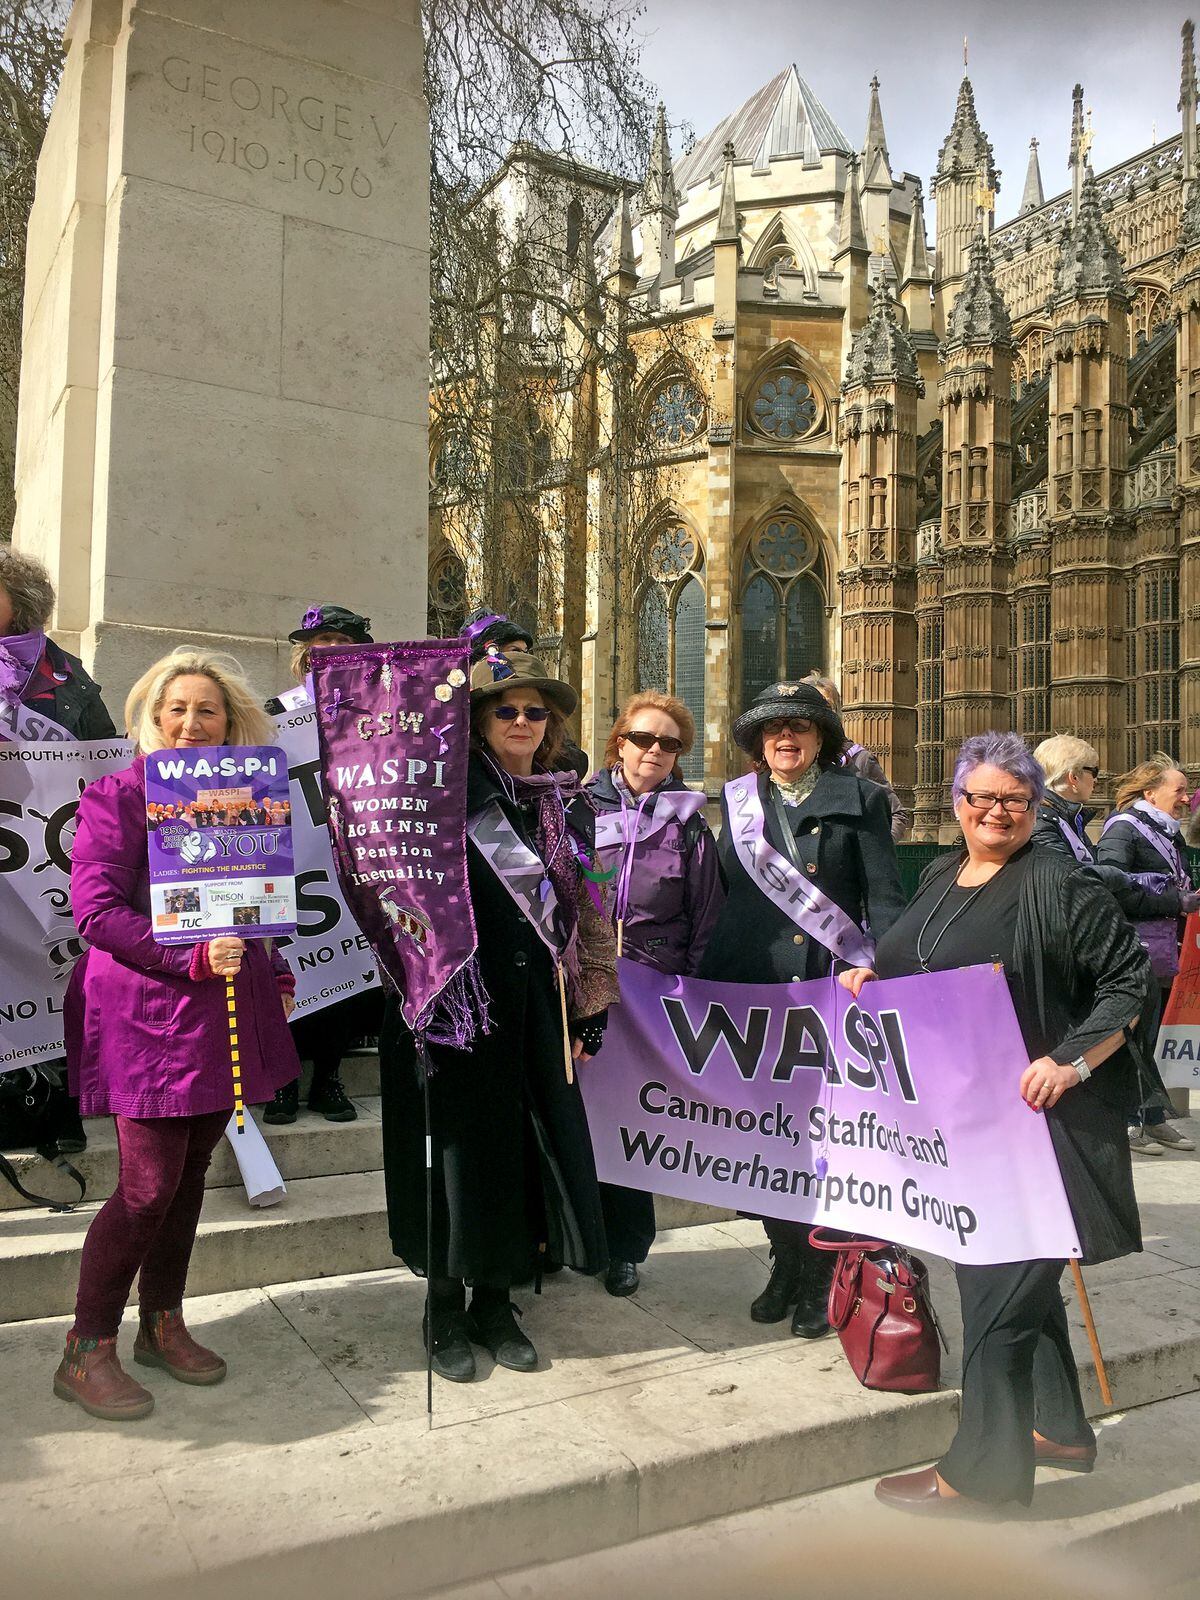 WASPI campaigners outside the House of Commons